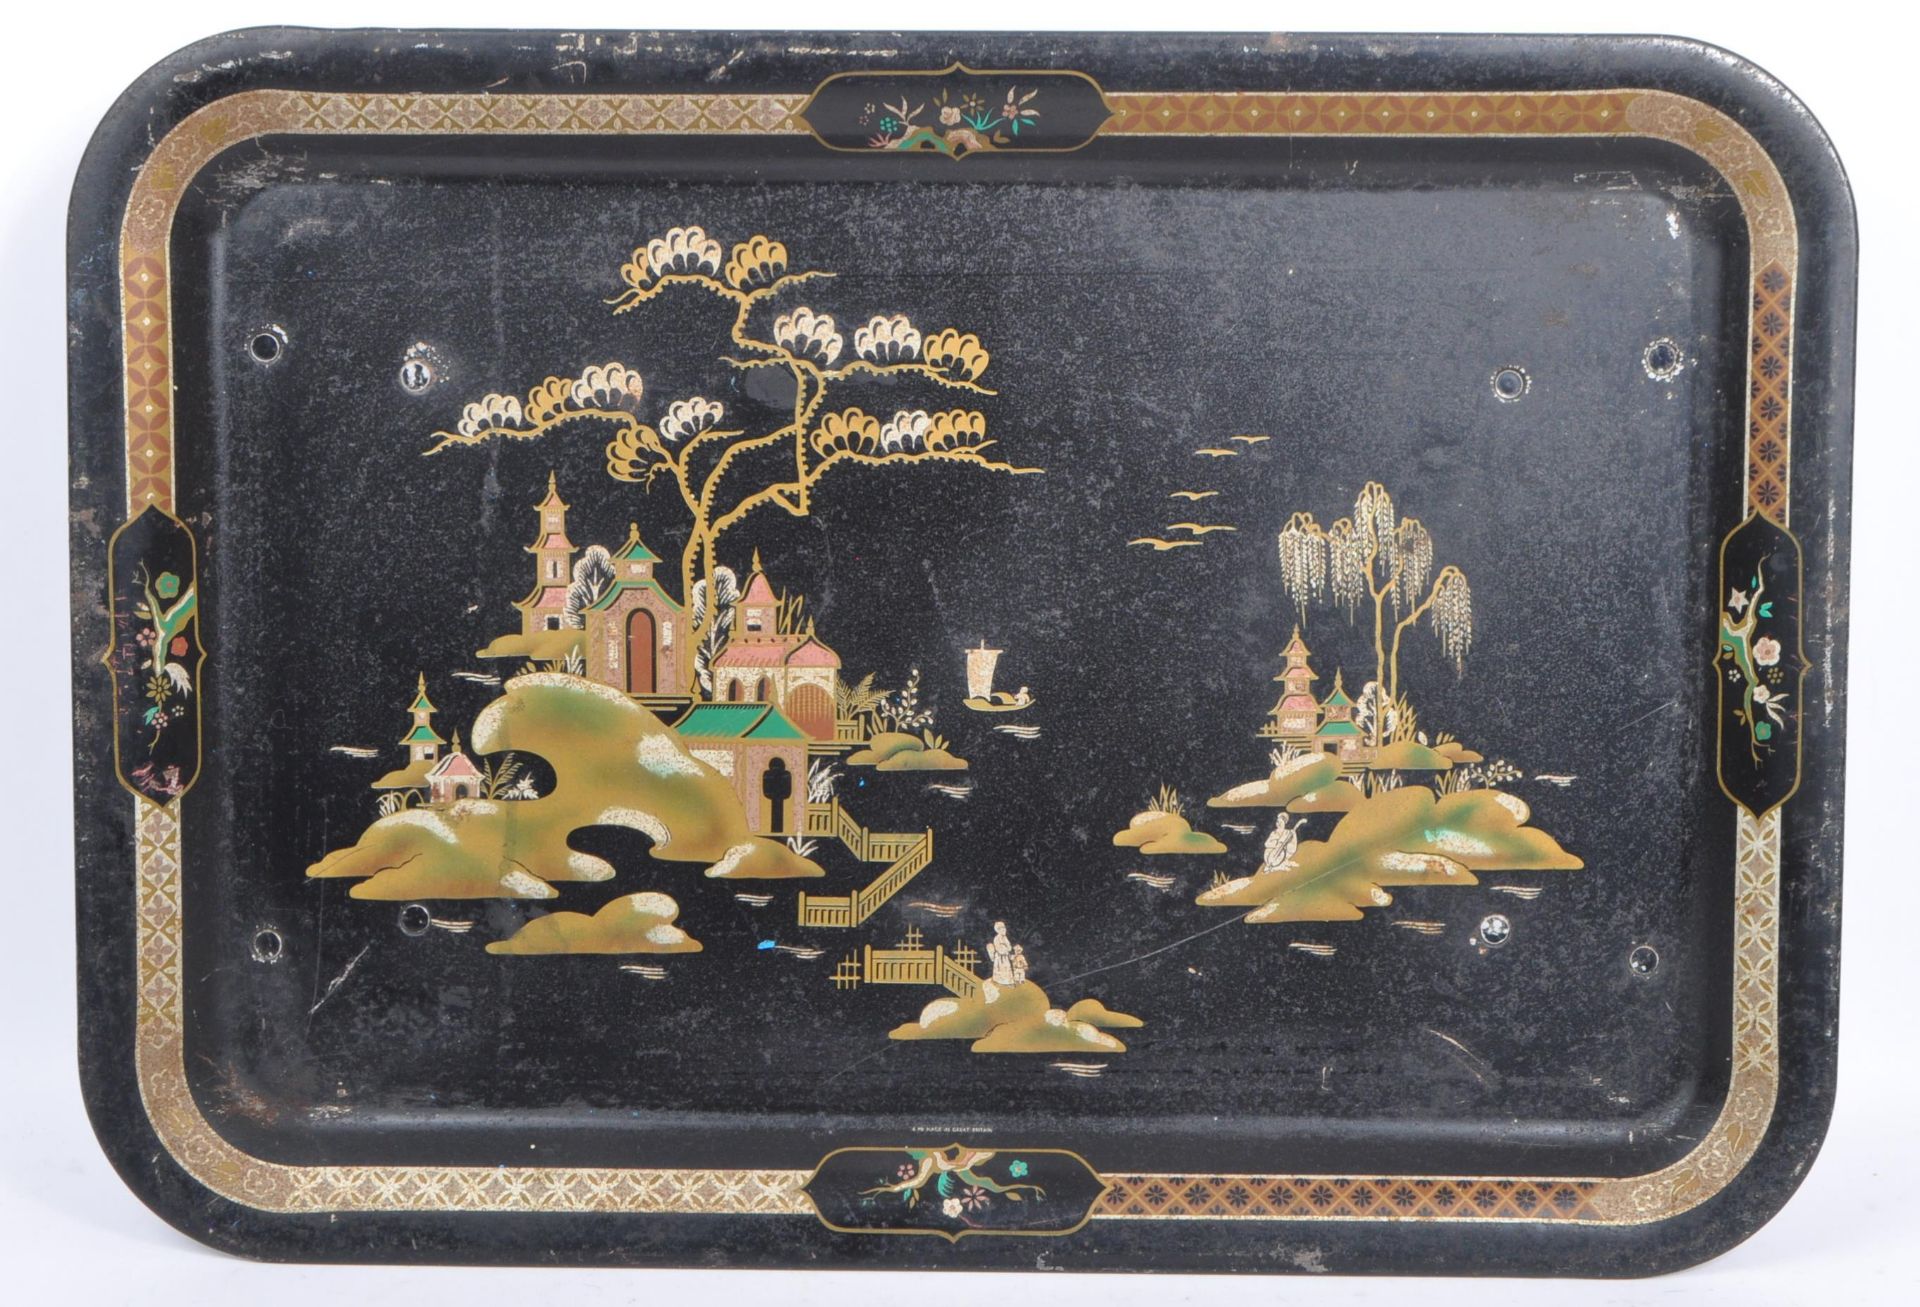 WORCESTER WARE - VINTAGE 20TH CENTURY ASIAN SERVING TRAY